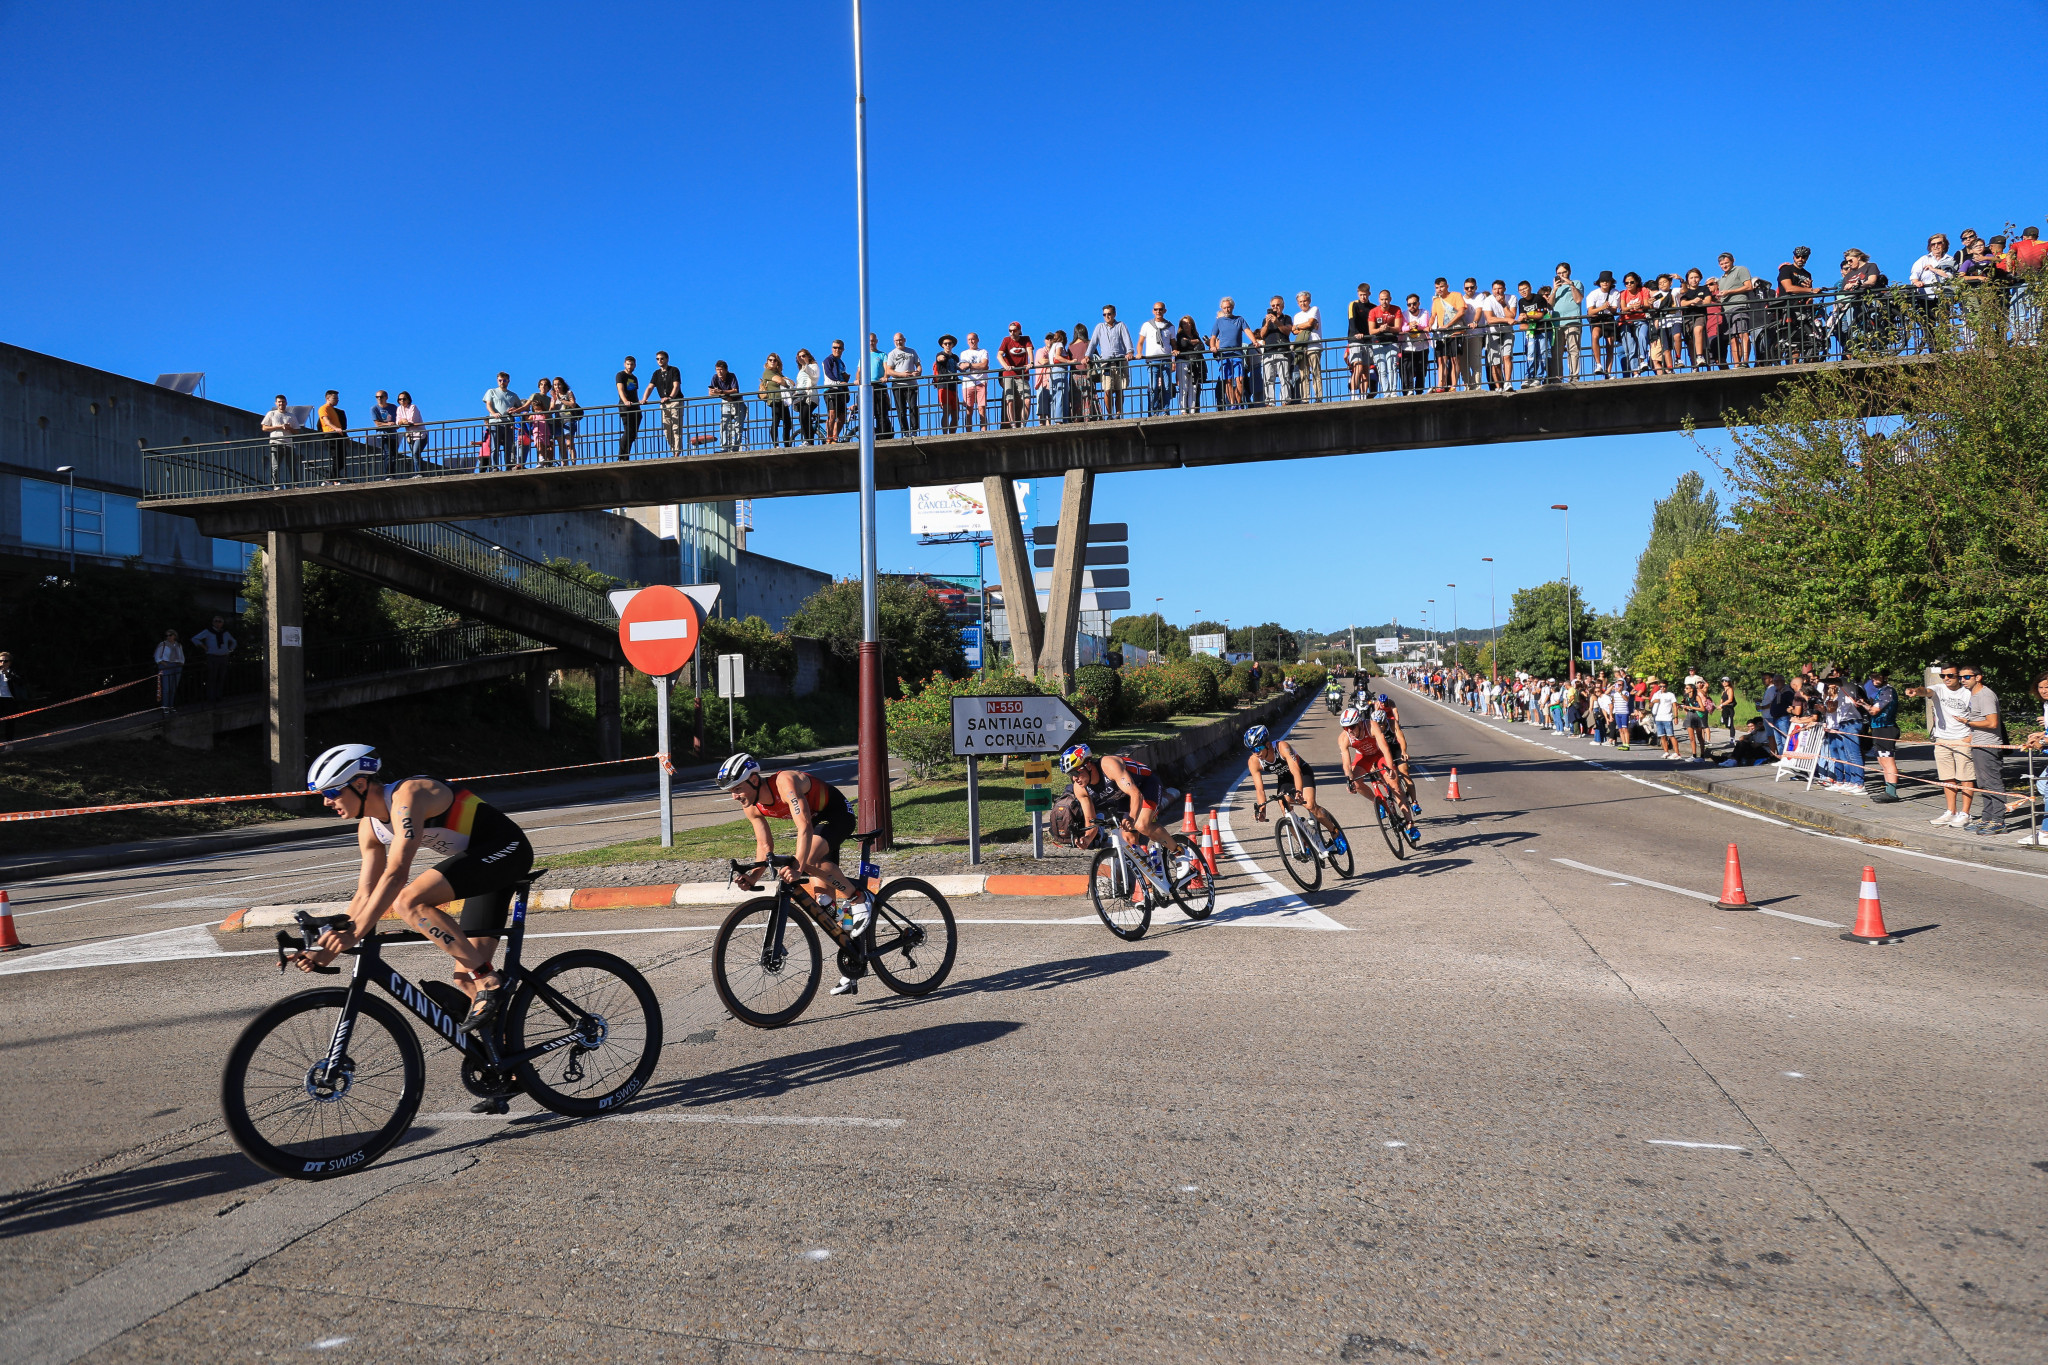 Significant stretches of the eight-lap 40km bike route were lined with spectators in the city of Pontevedra, which has a population of less than 100,000 ©World Triathlon